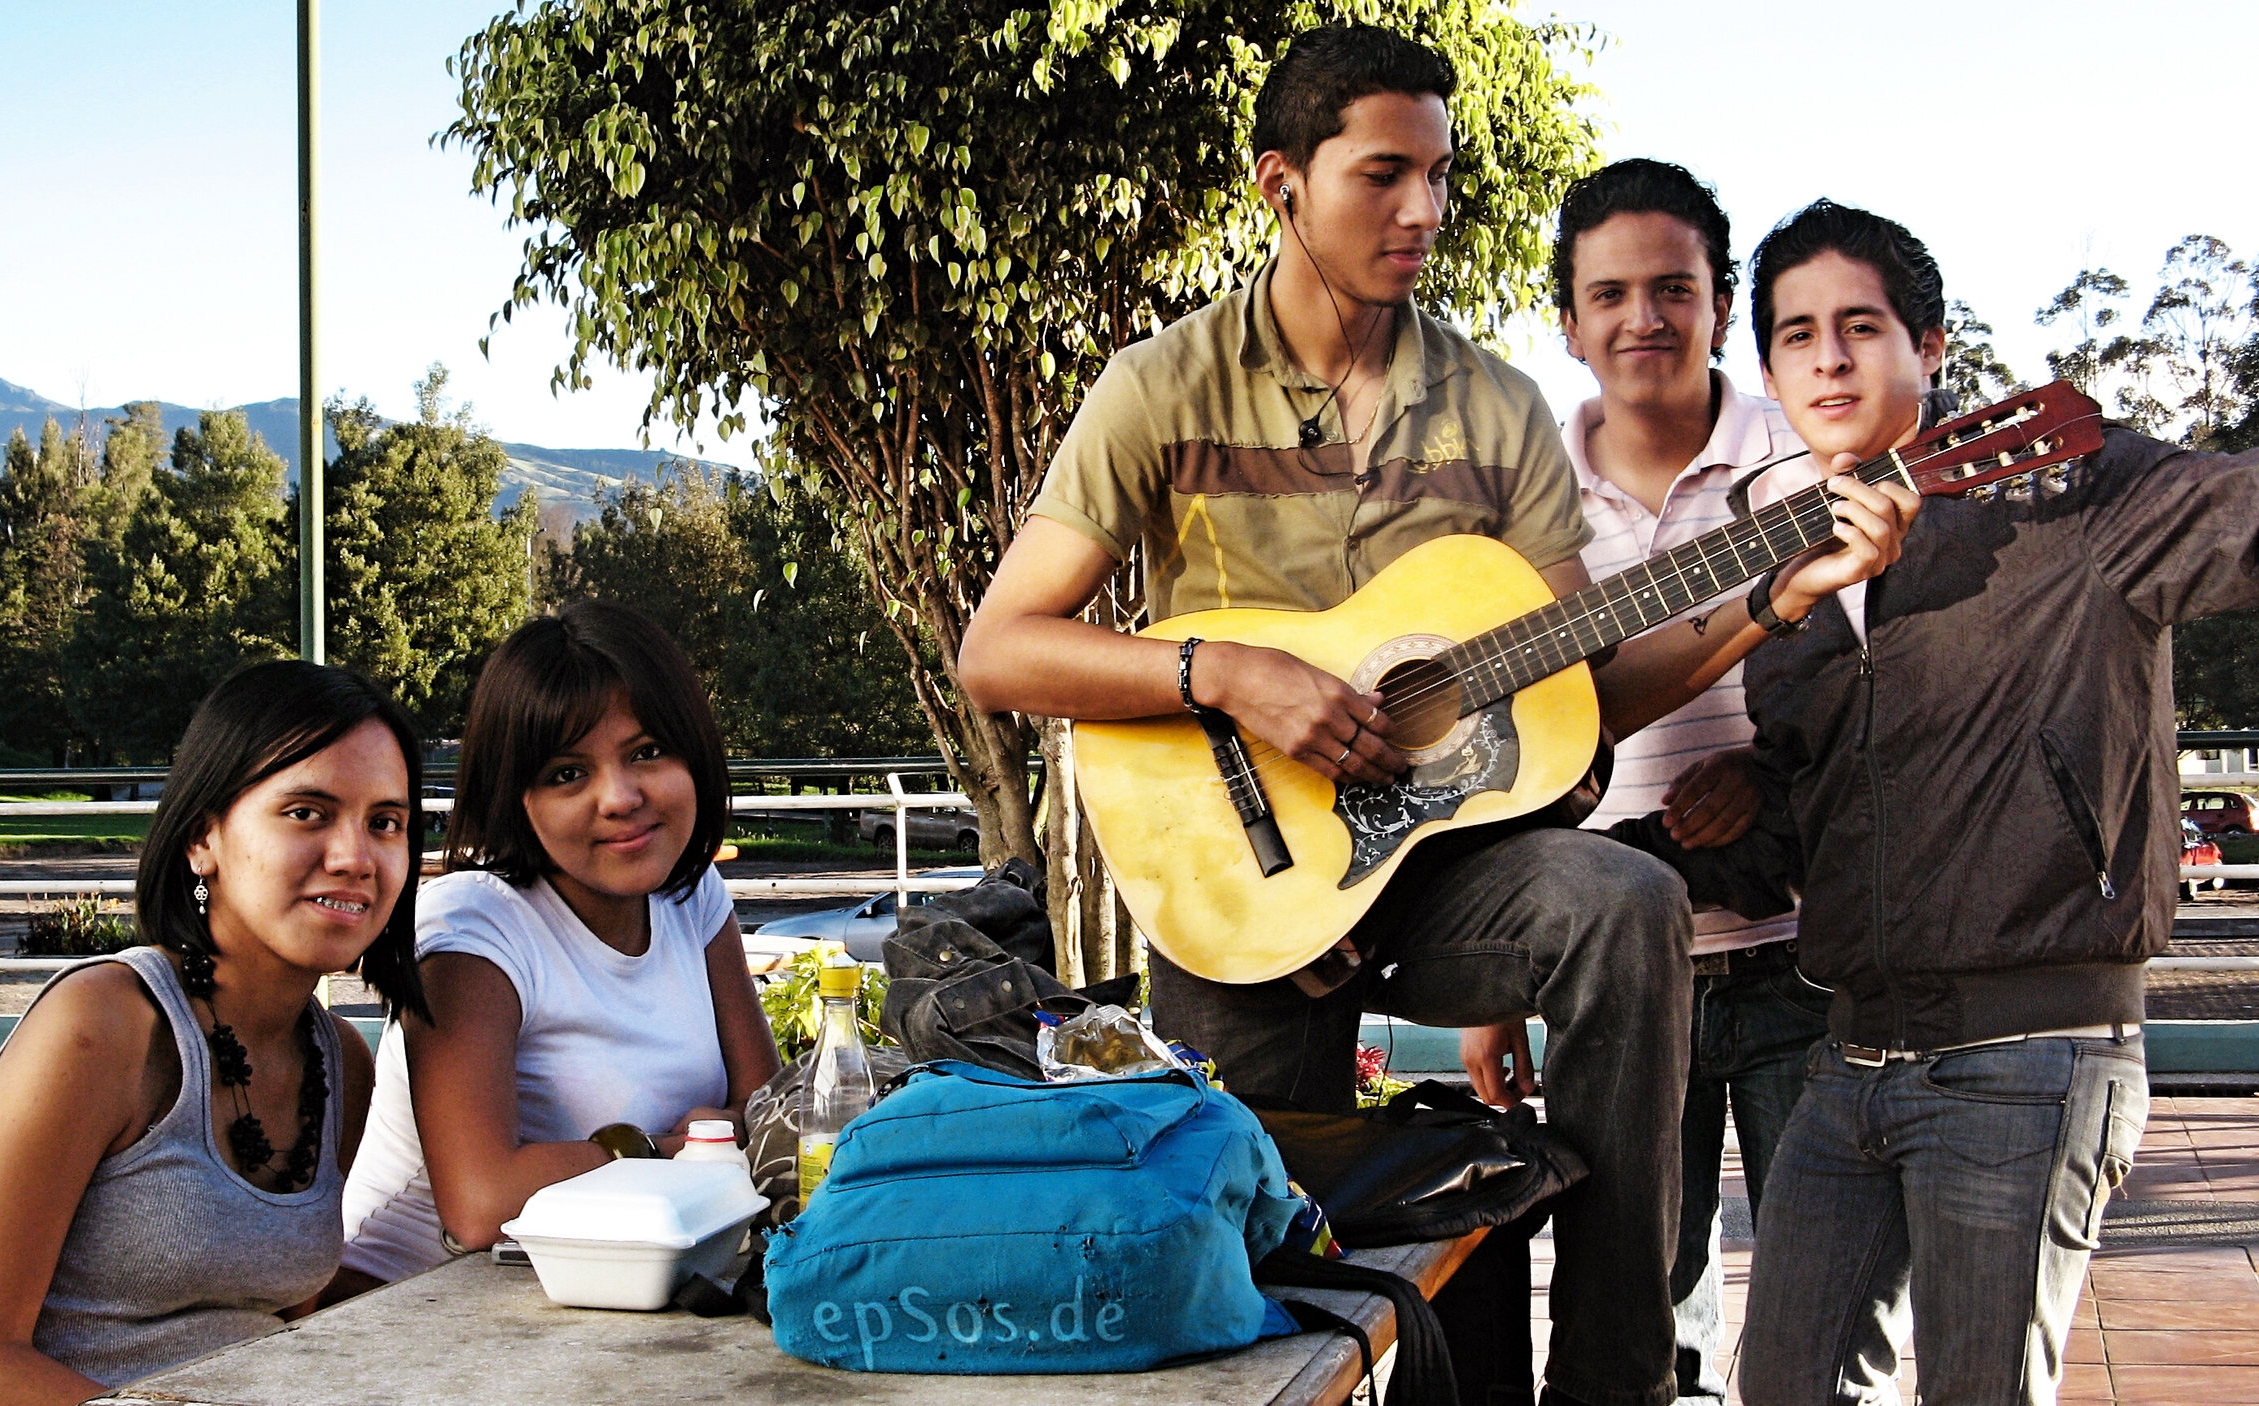 Dominican Republic's Teens: The happiest students in the world